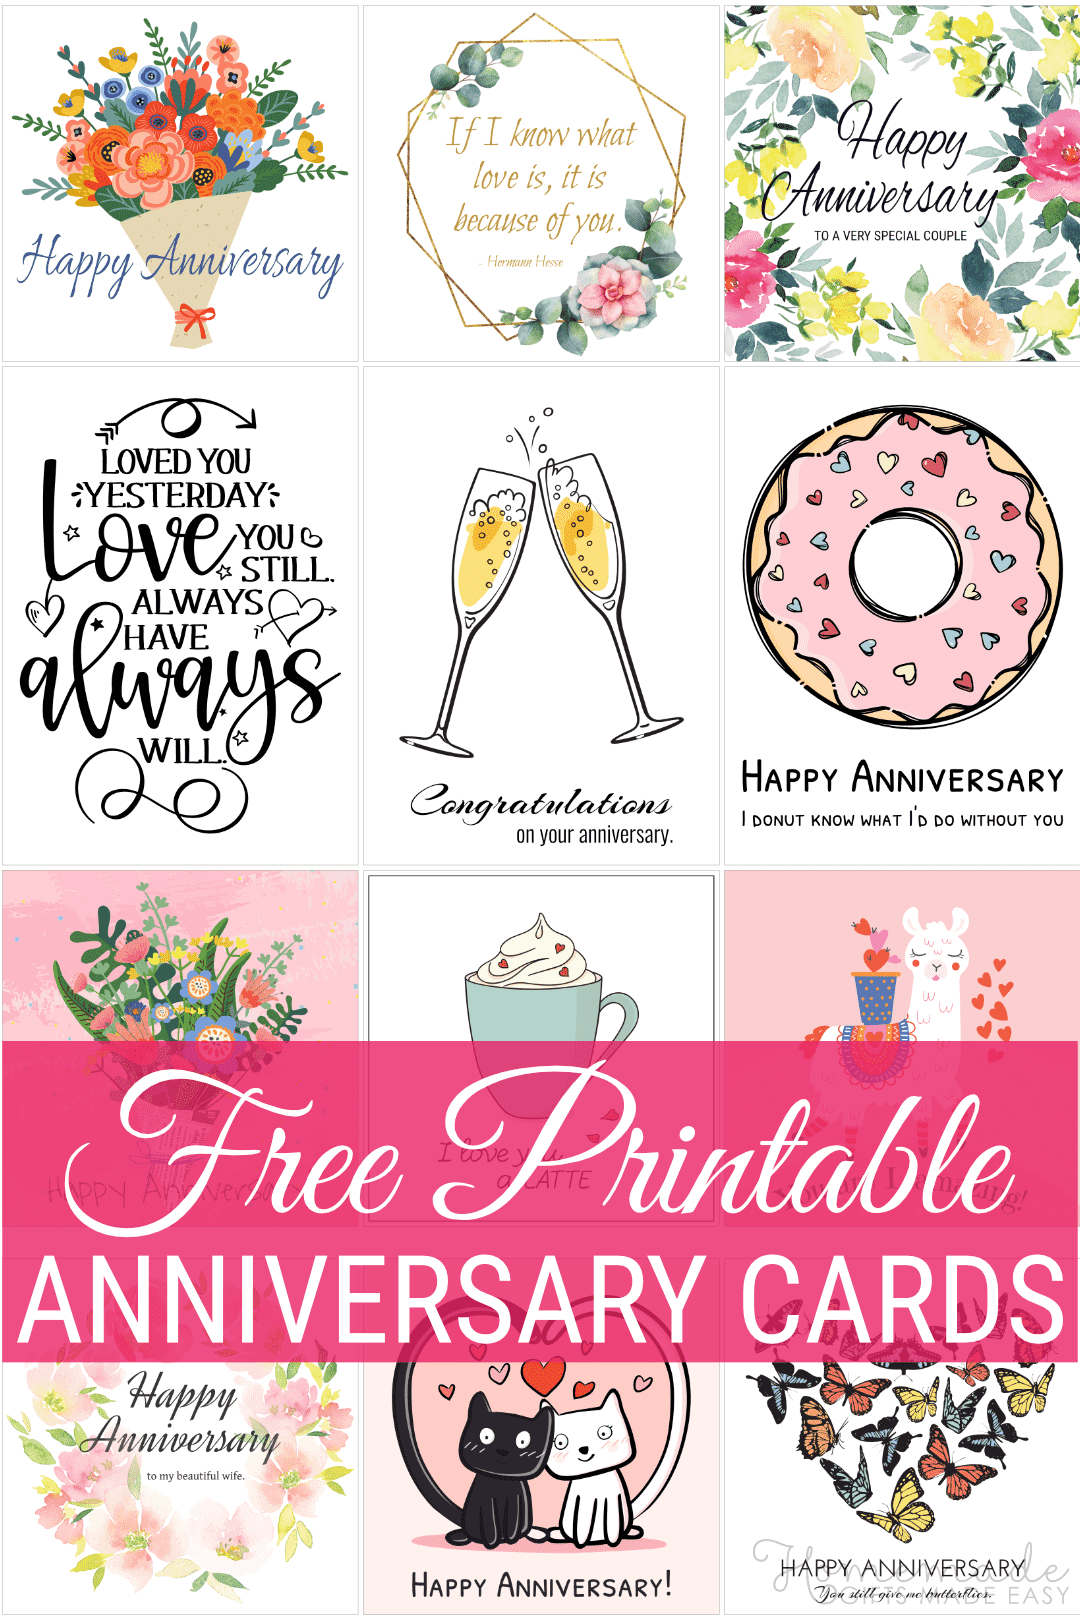 Free Printable Anniversary Cards - Free Printable Anniversary Cards No Download